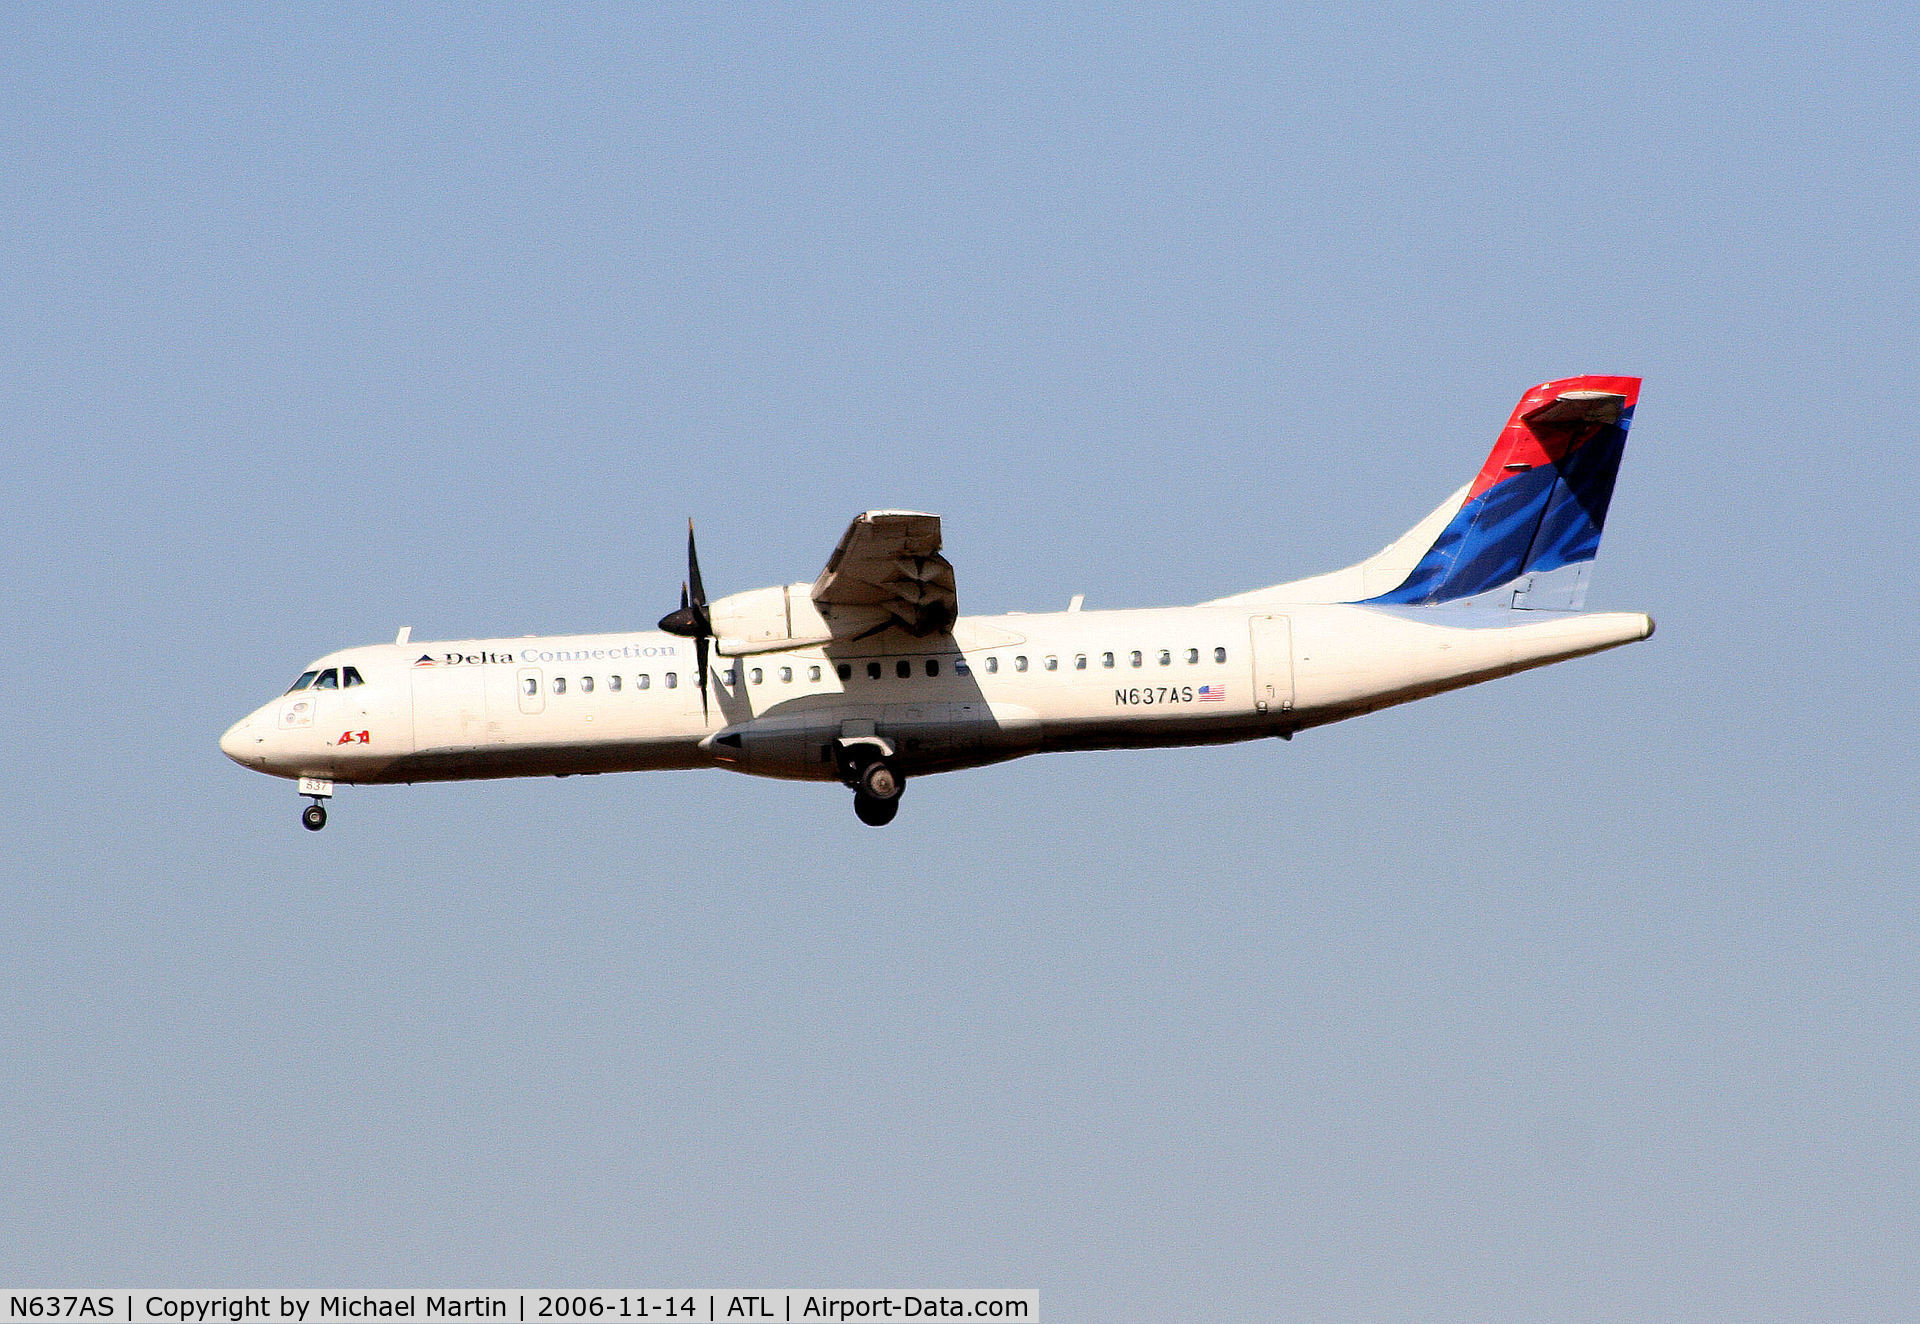 N637AS, 1993 ATR 72-212 C/N 383, Over the numbers of 27L